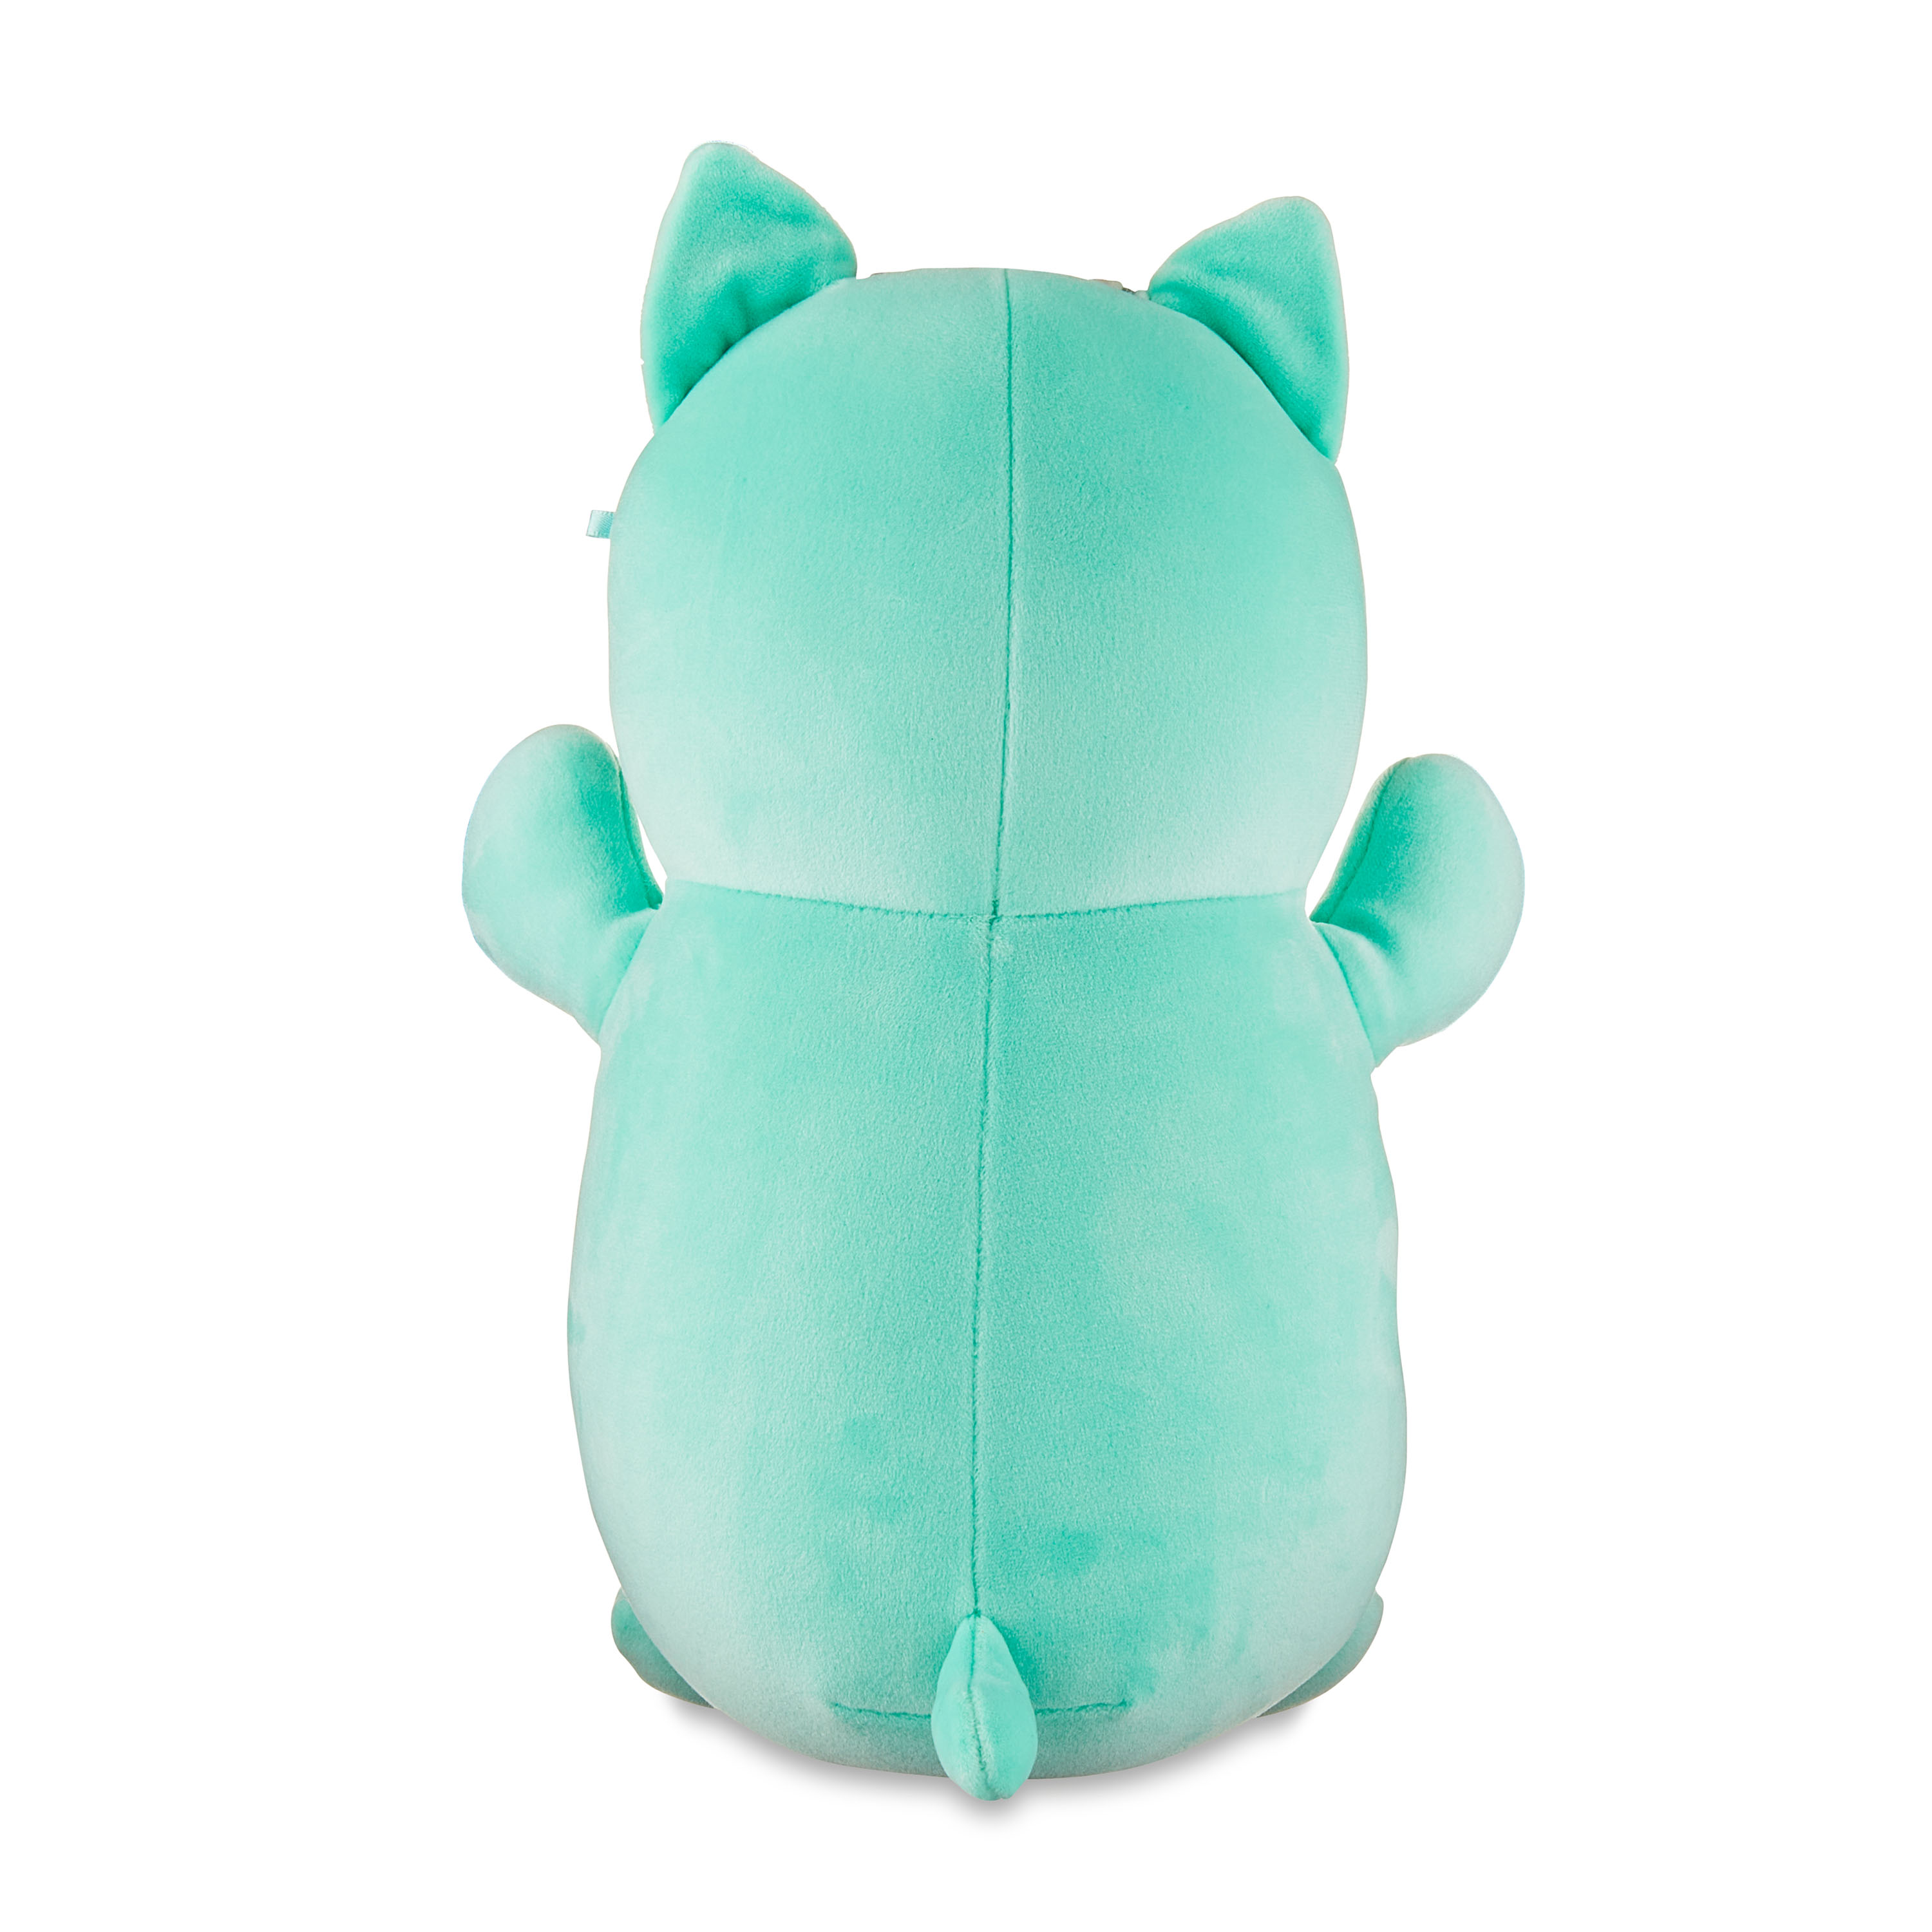 Squishmallows Official Hugmee Plush 10 inch Teal Tabby Cat - Child's ...